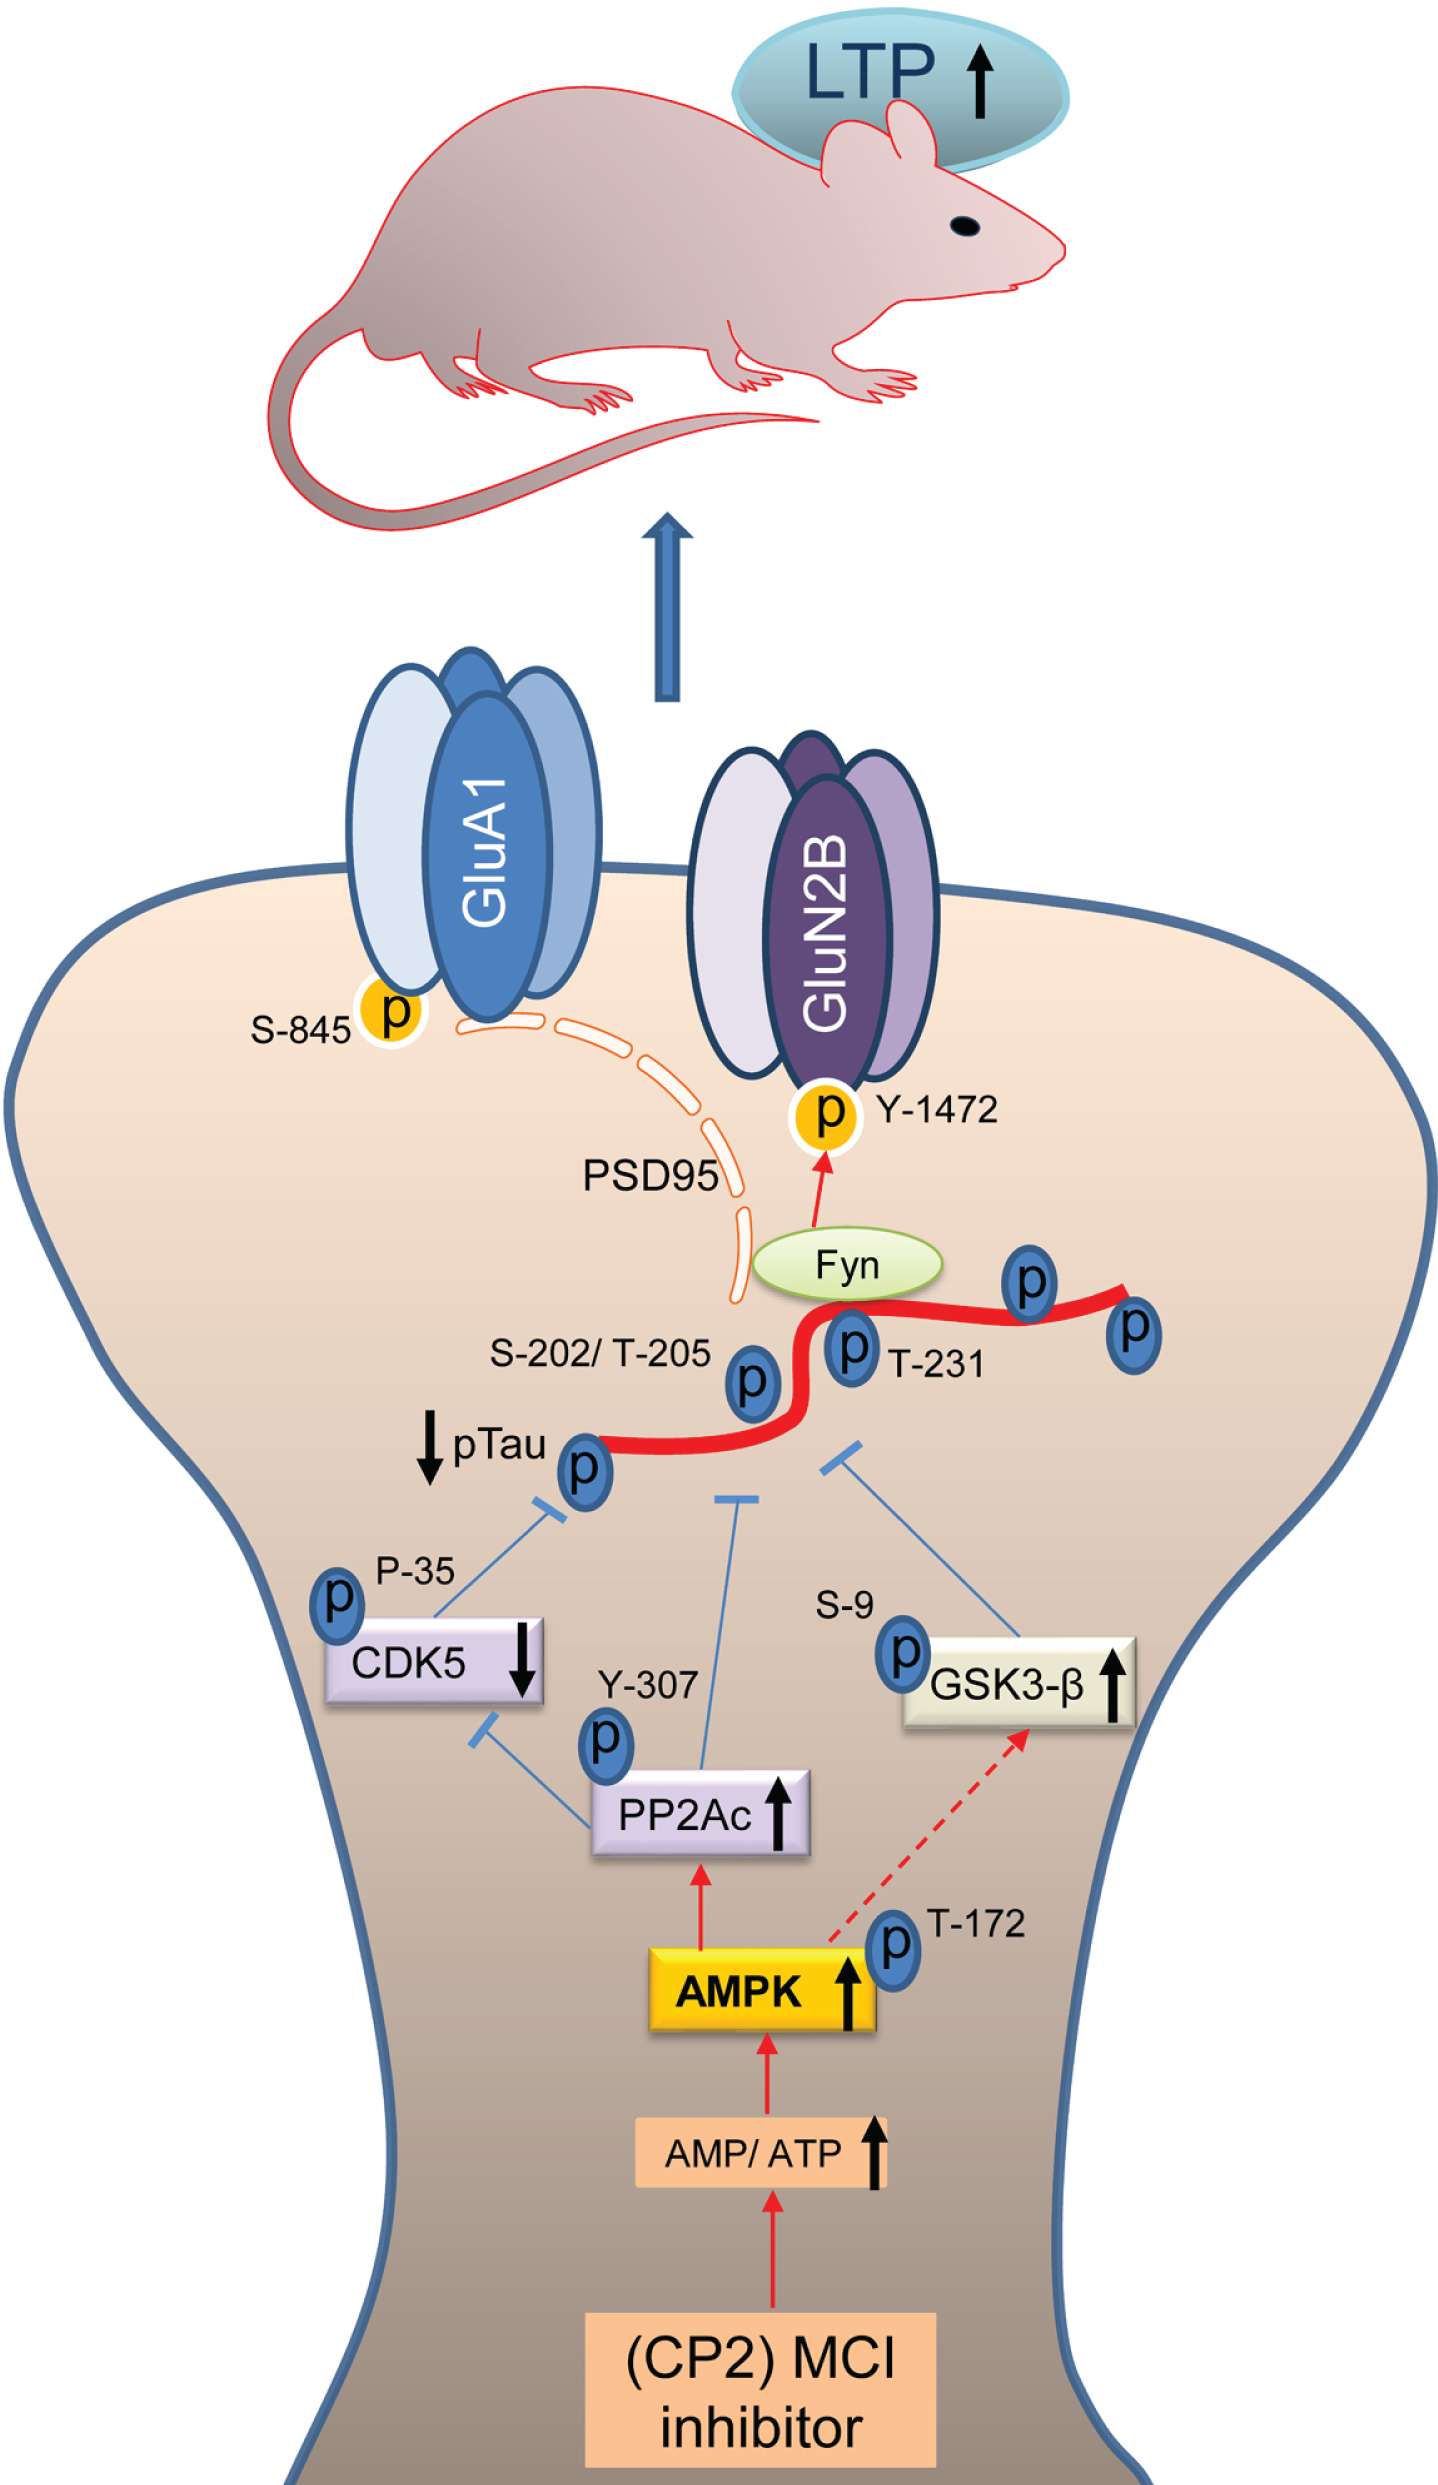 Schematic diagram of the mechanisms involved in CP2-mediated neuroprotection. Mechanisms of CP2-dependent restoration of pTau-mediated synaptic dysfunction. Under physiological conditions, tau transports Fyn to the dendritic spines where Fyn phosphorylates the NR2B subunit of NMDARs at Y-1472 leading to the stabilization of the NMDAR:PSD95 complex. Increased tau phosphorylation leads to the destabilization of the NMDAR:PSD95 and AMPAR:PSD95 complexes with increased AMPAR endocytosis resulting in reduced synaptic strength and LTP. Partial inhibition of MCI with CP2 increases AMP/ATP ratio that directly activates AMPK with concomitant effect on the activity of PP2Ac, CDK5, and GSK3β resulting in a significant reduction in pTau levels. Reduction in pTau and Fyn results in the stabilization of the NMDAR and AMPAR complexes and improved LTP leading to enhanced cognitive function in 3xTg-AD mice.